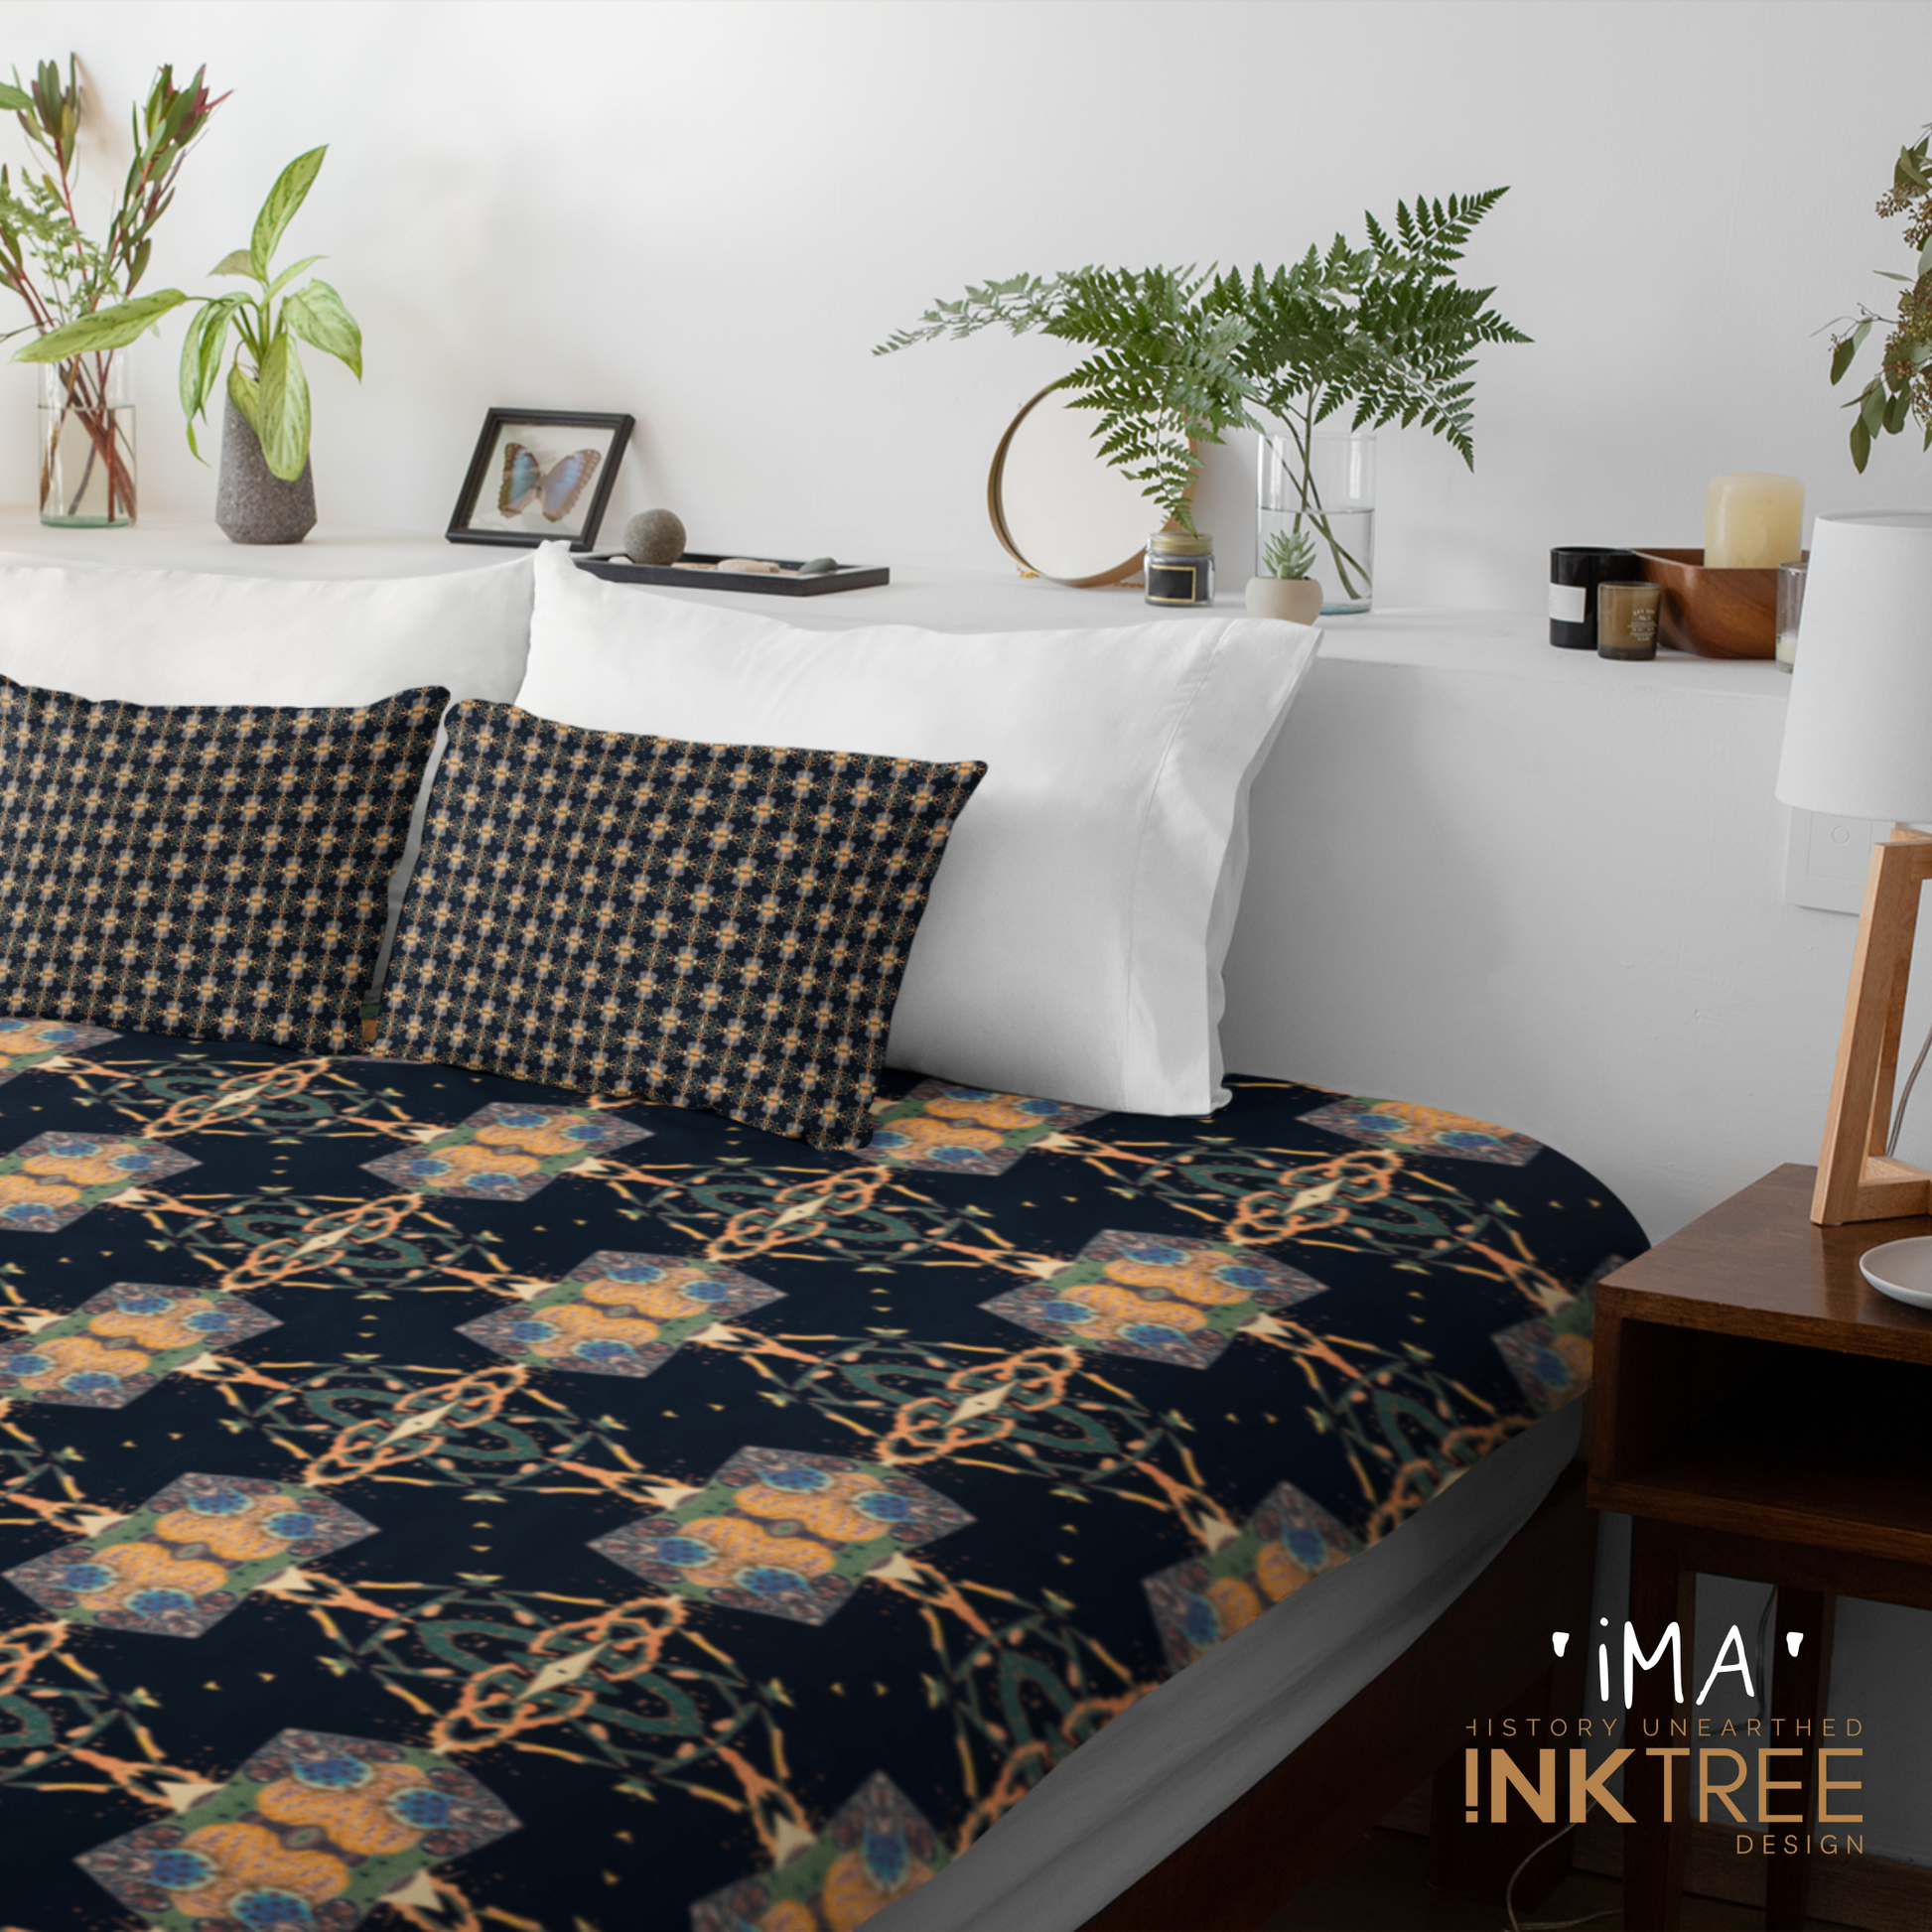 A quilt or doona cover and front pillows with a gold, black, blue, green and white oriental looking pattern on a bed with a white wall, white pillows and white backboard background. There is a lamp with a white shade and wood base and plants and a small round metal mirror on the back board. There is also a ima, history unearthed ink tree design logo in the bottom right hand corner on it.